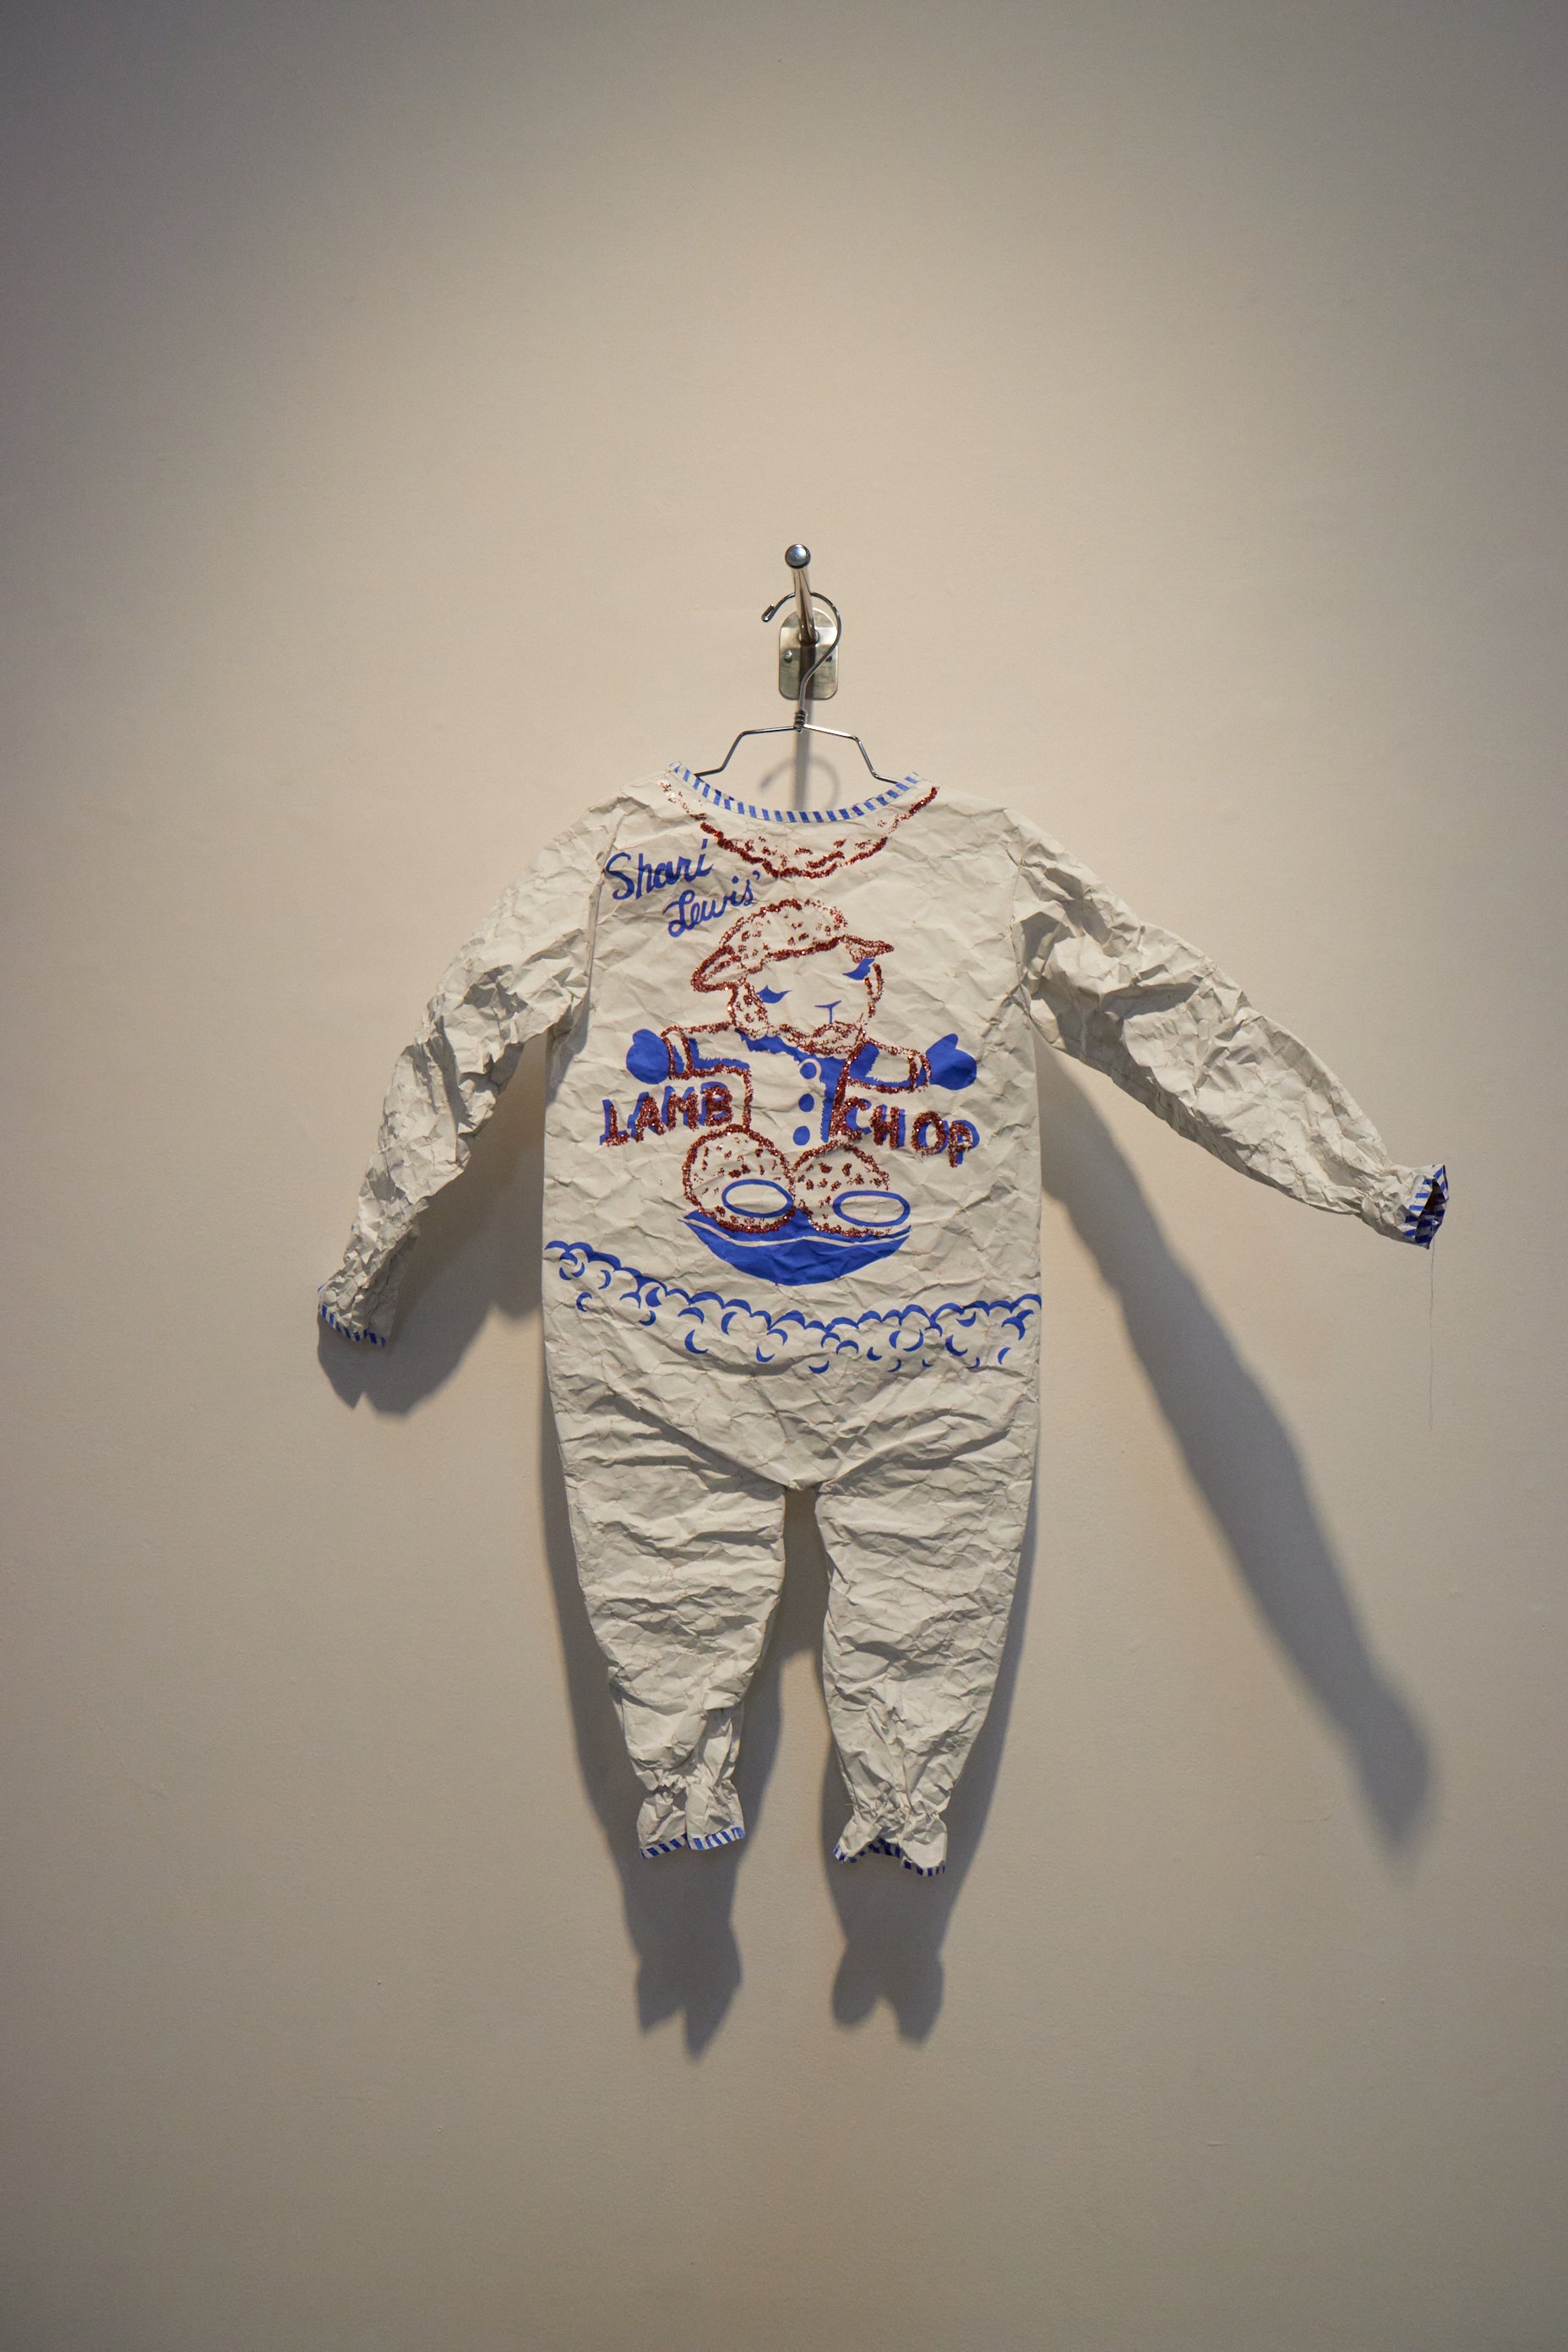  Shari Lewis' Lamb Chop baby clothes from Phranc's childhood in her art exhibition The Butch Closet in Craig Krull Gallery at Bergamot Station Arts Center, Santa Monica, Calif., on Nov. 4, 2023. The clothes that have been displayed were meticulously 